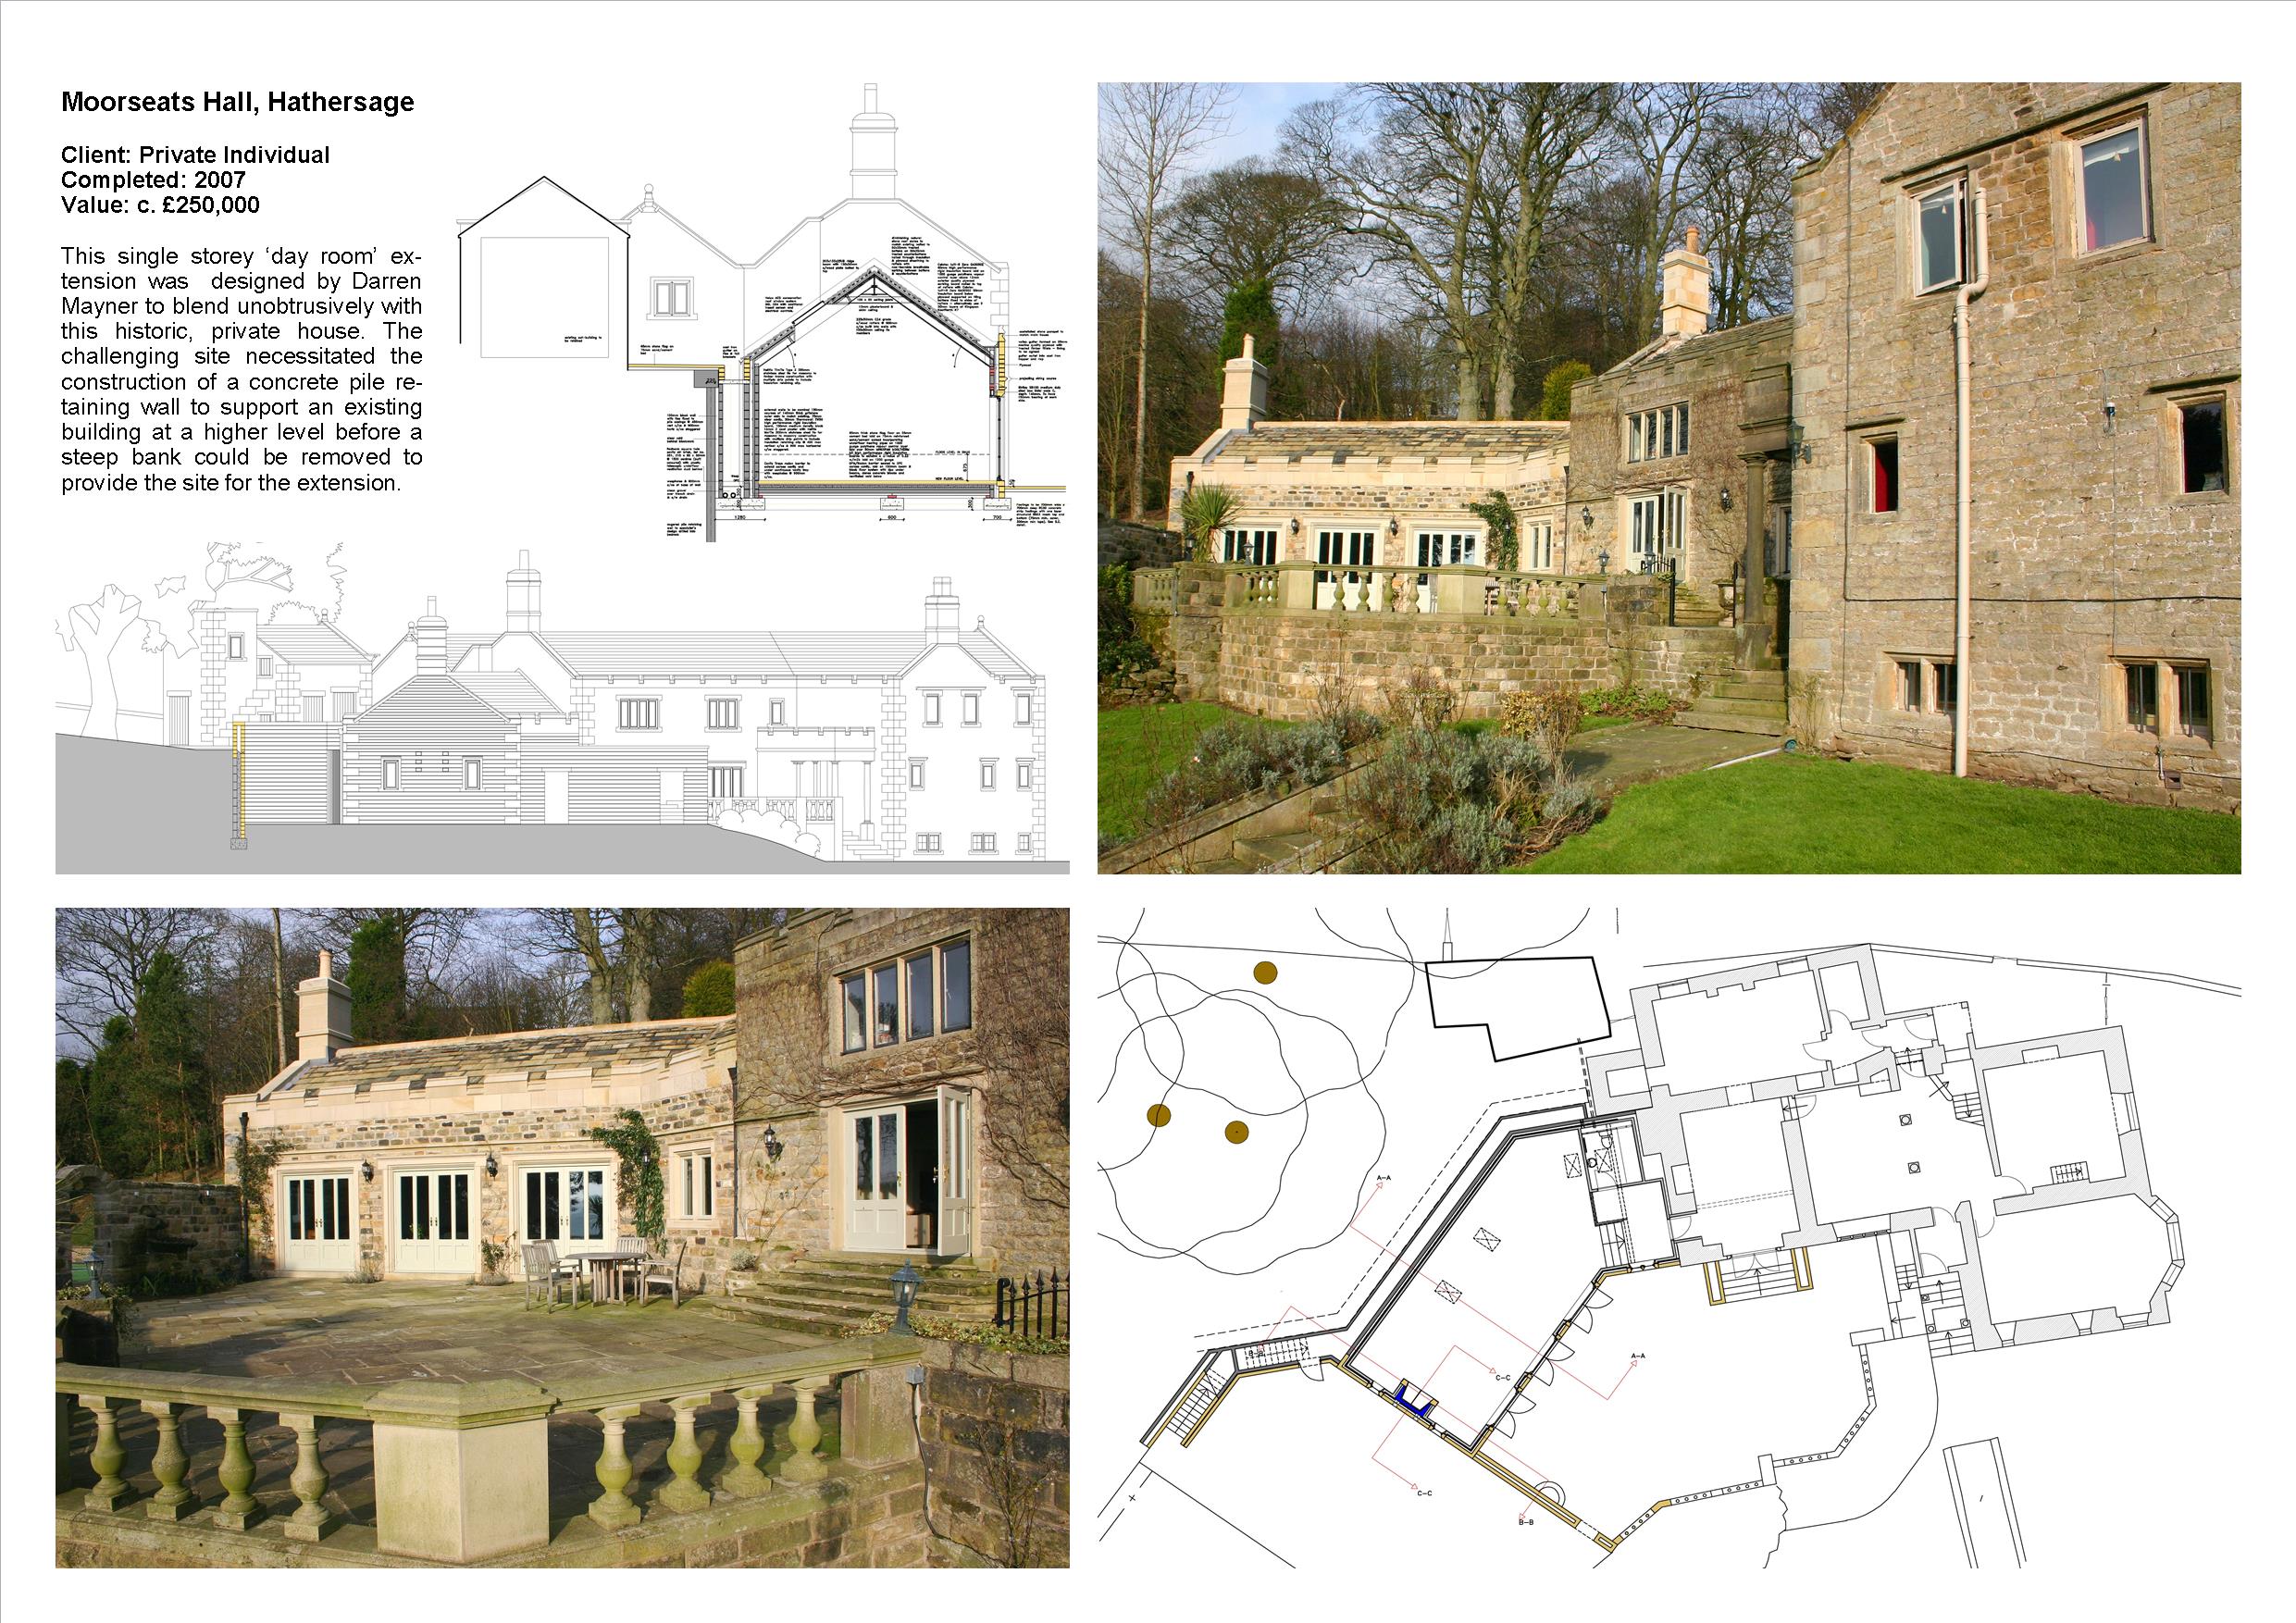 Extension to Moorseats Hall Hathersage designed by Darren Mayner